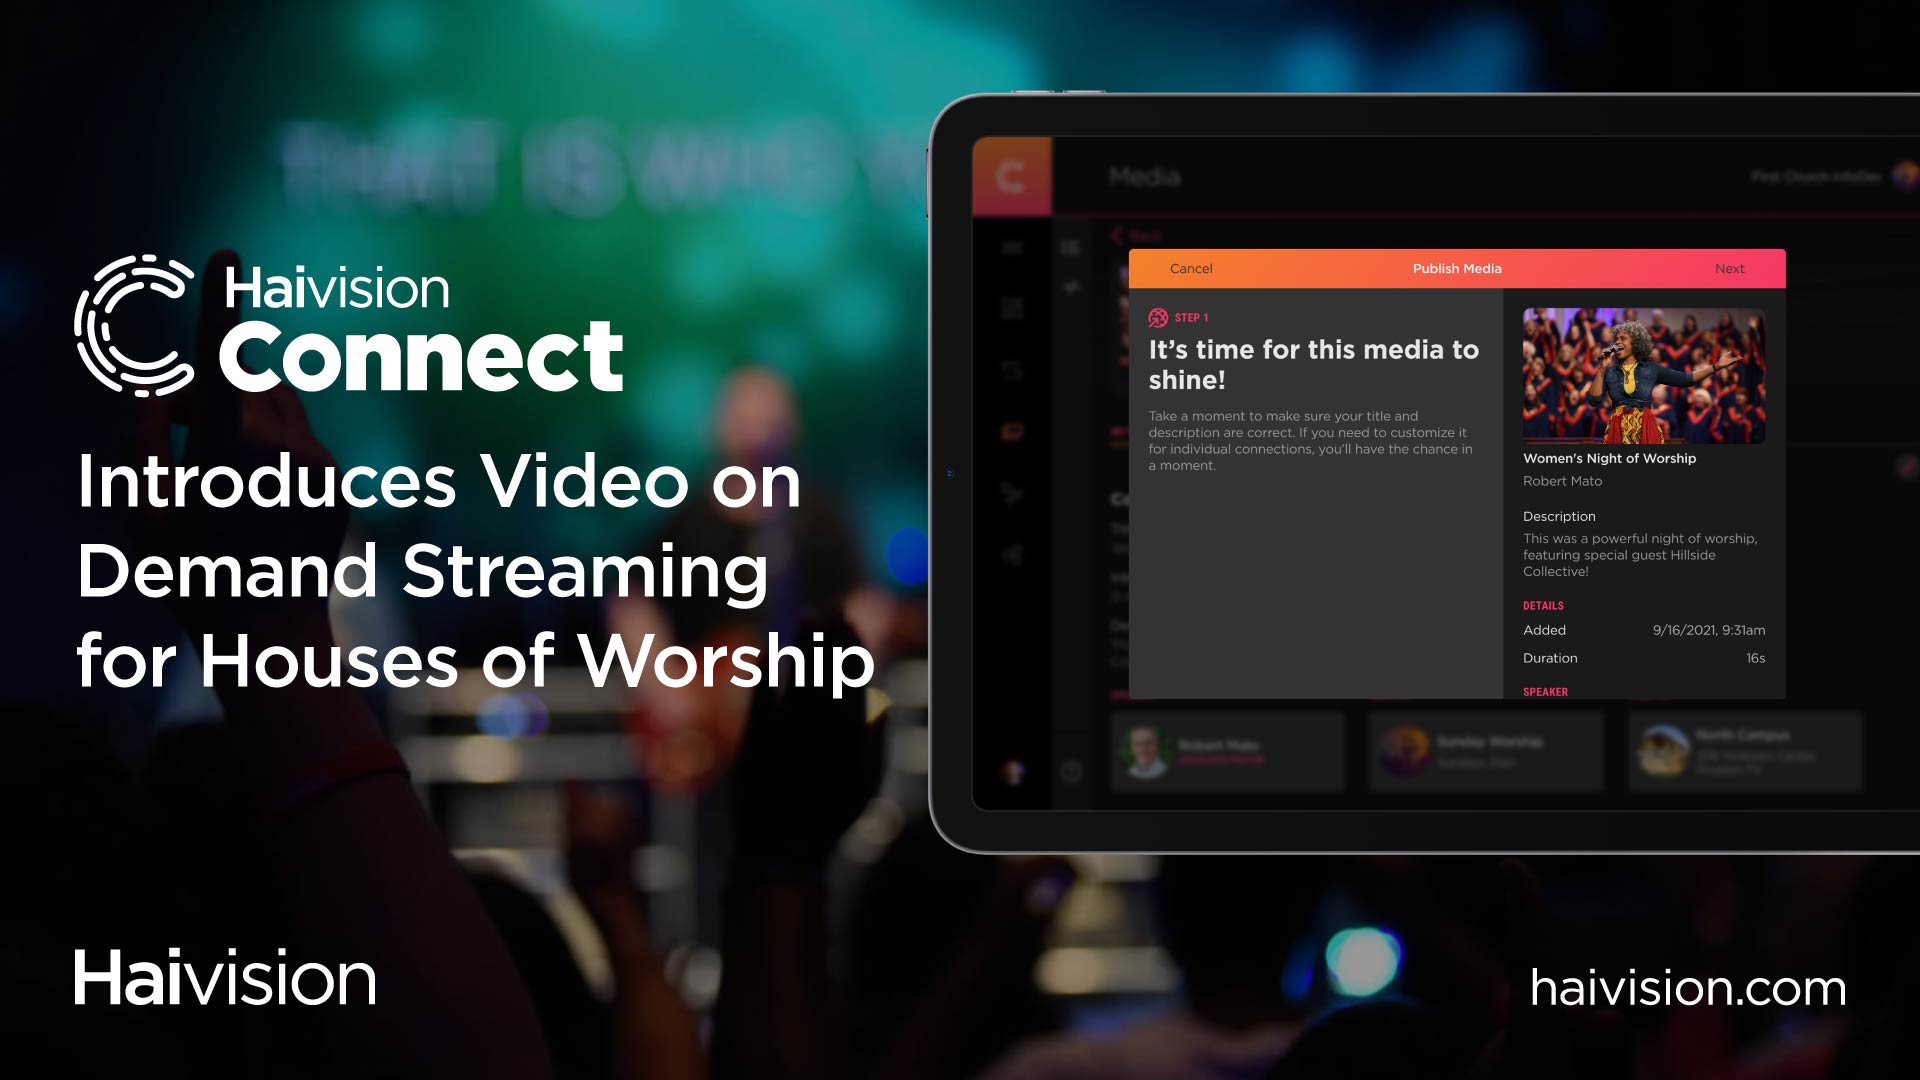 Haivision Connect Rolls Out Video on Demand Streaming for Houses of Worship